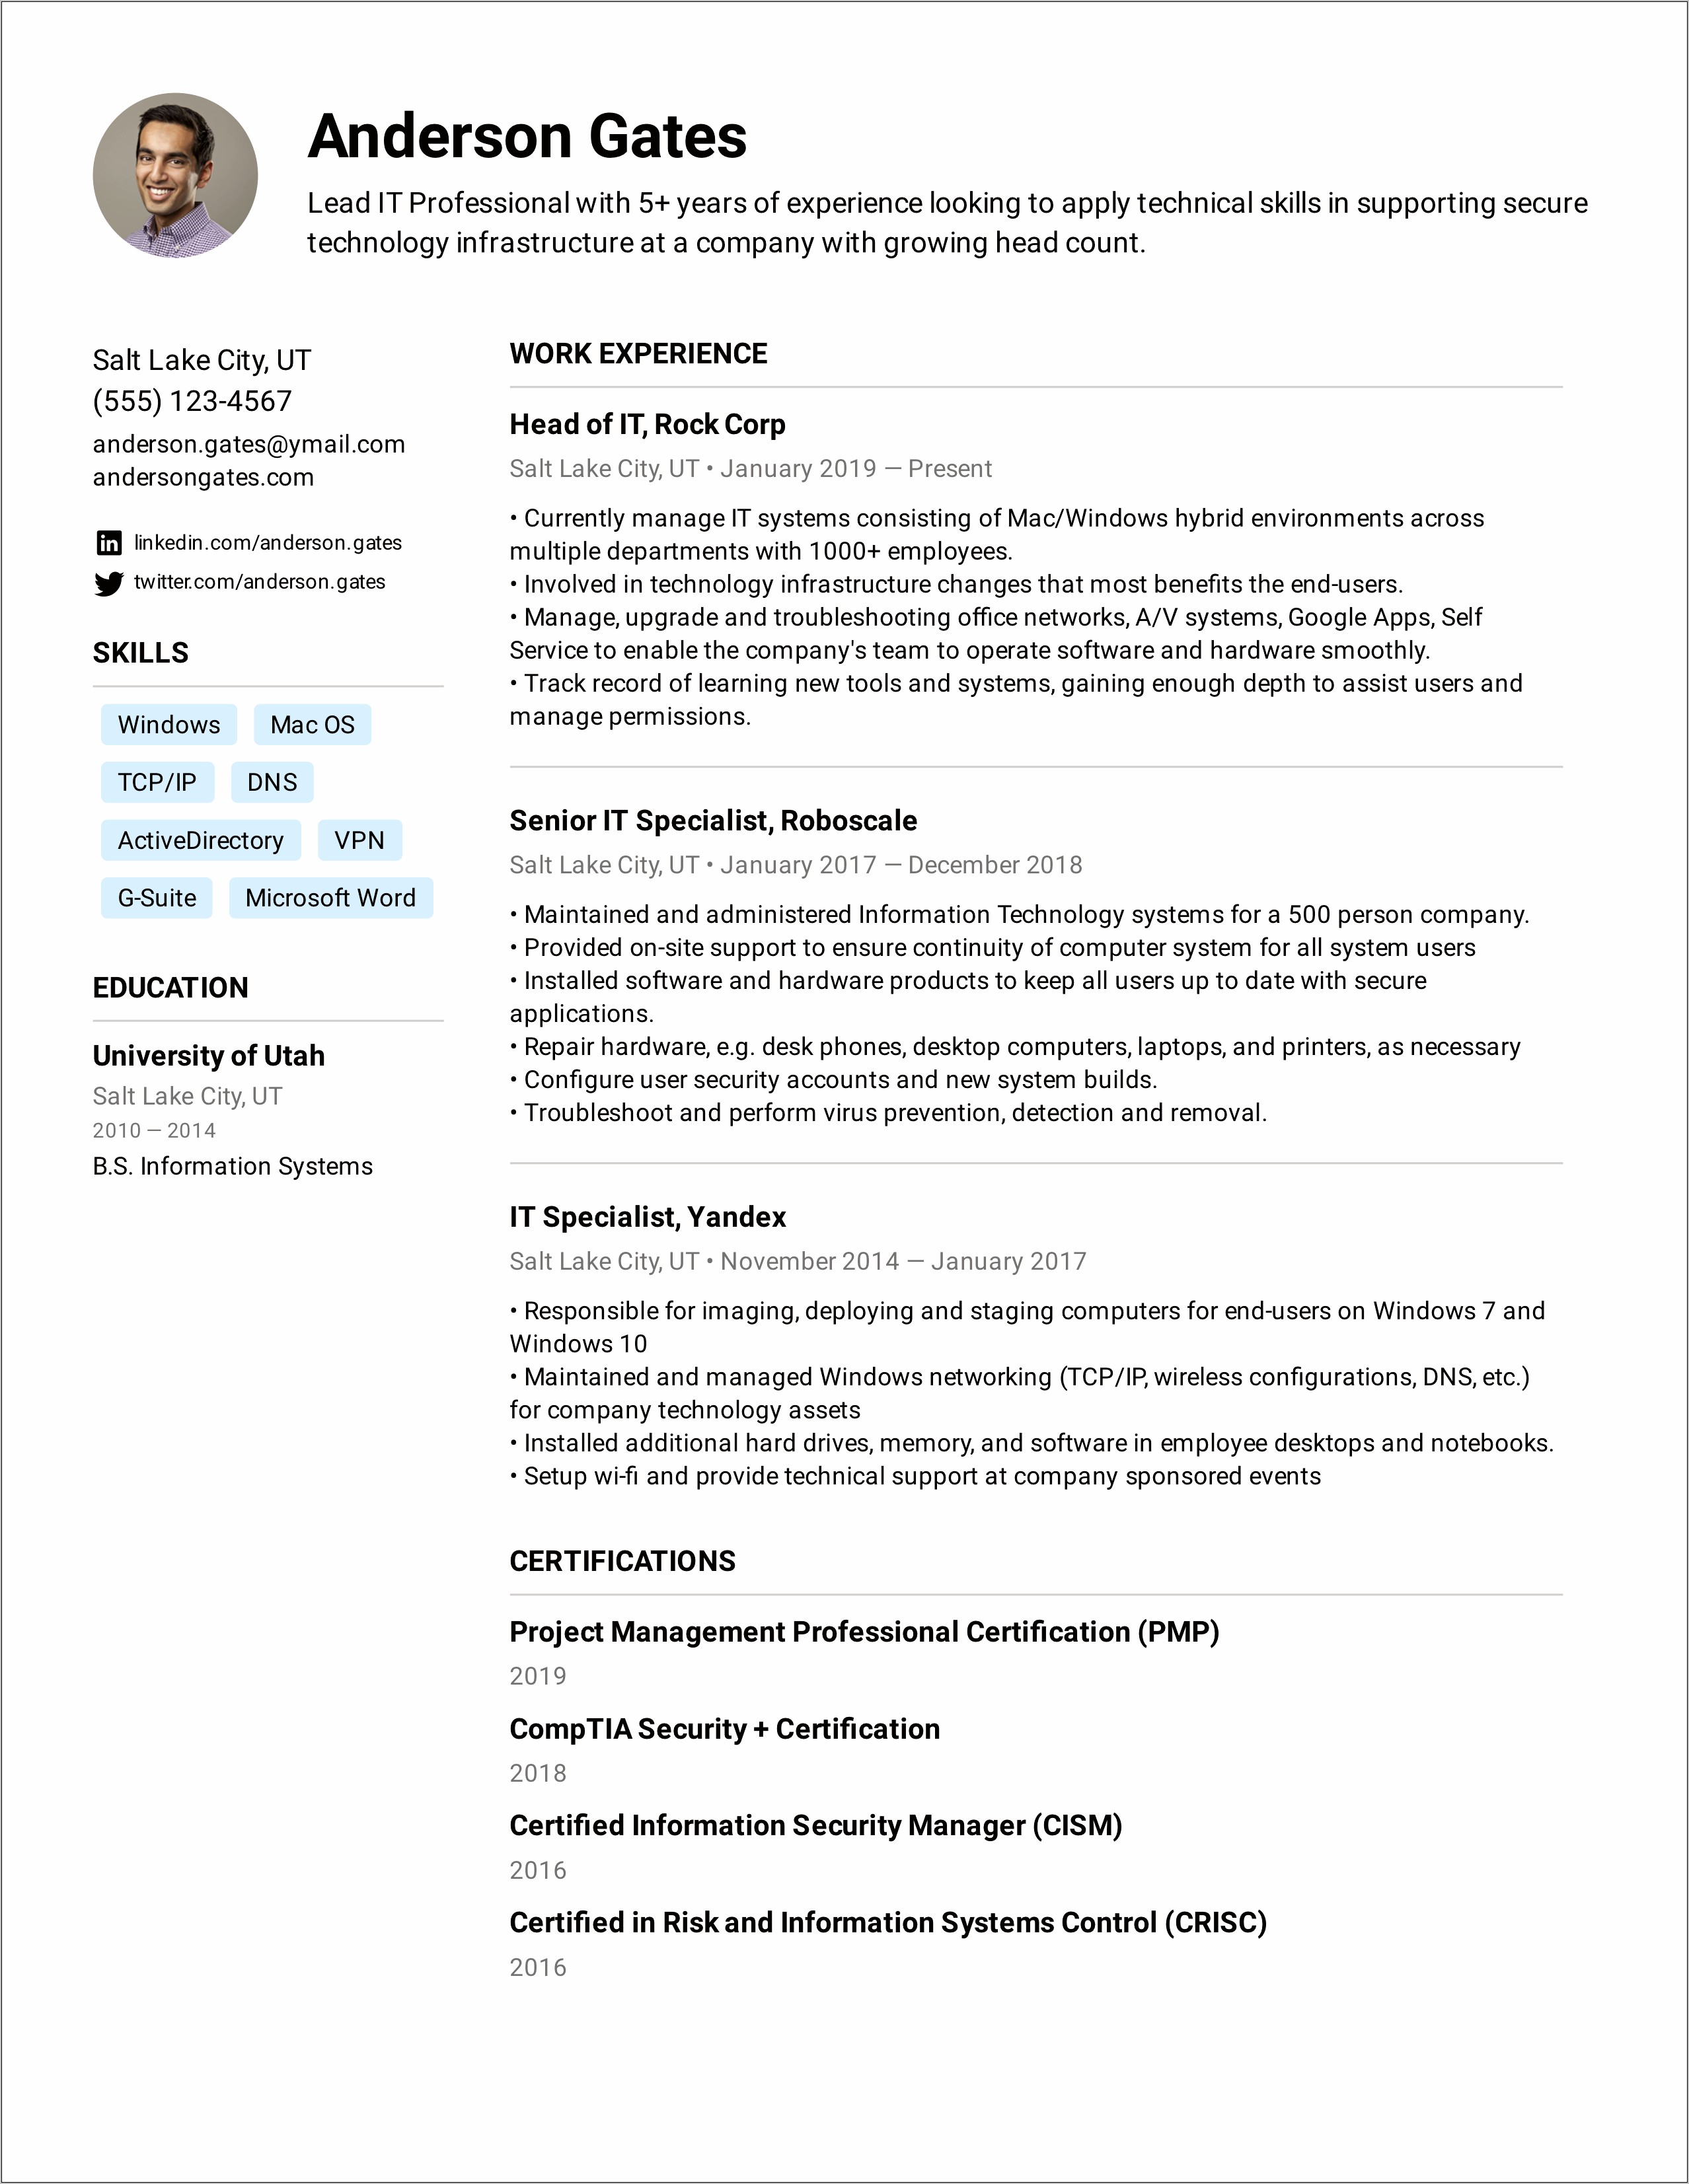 Short Pitch About Yourself For Resume Examples